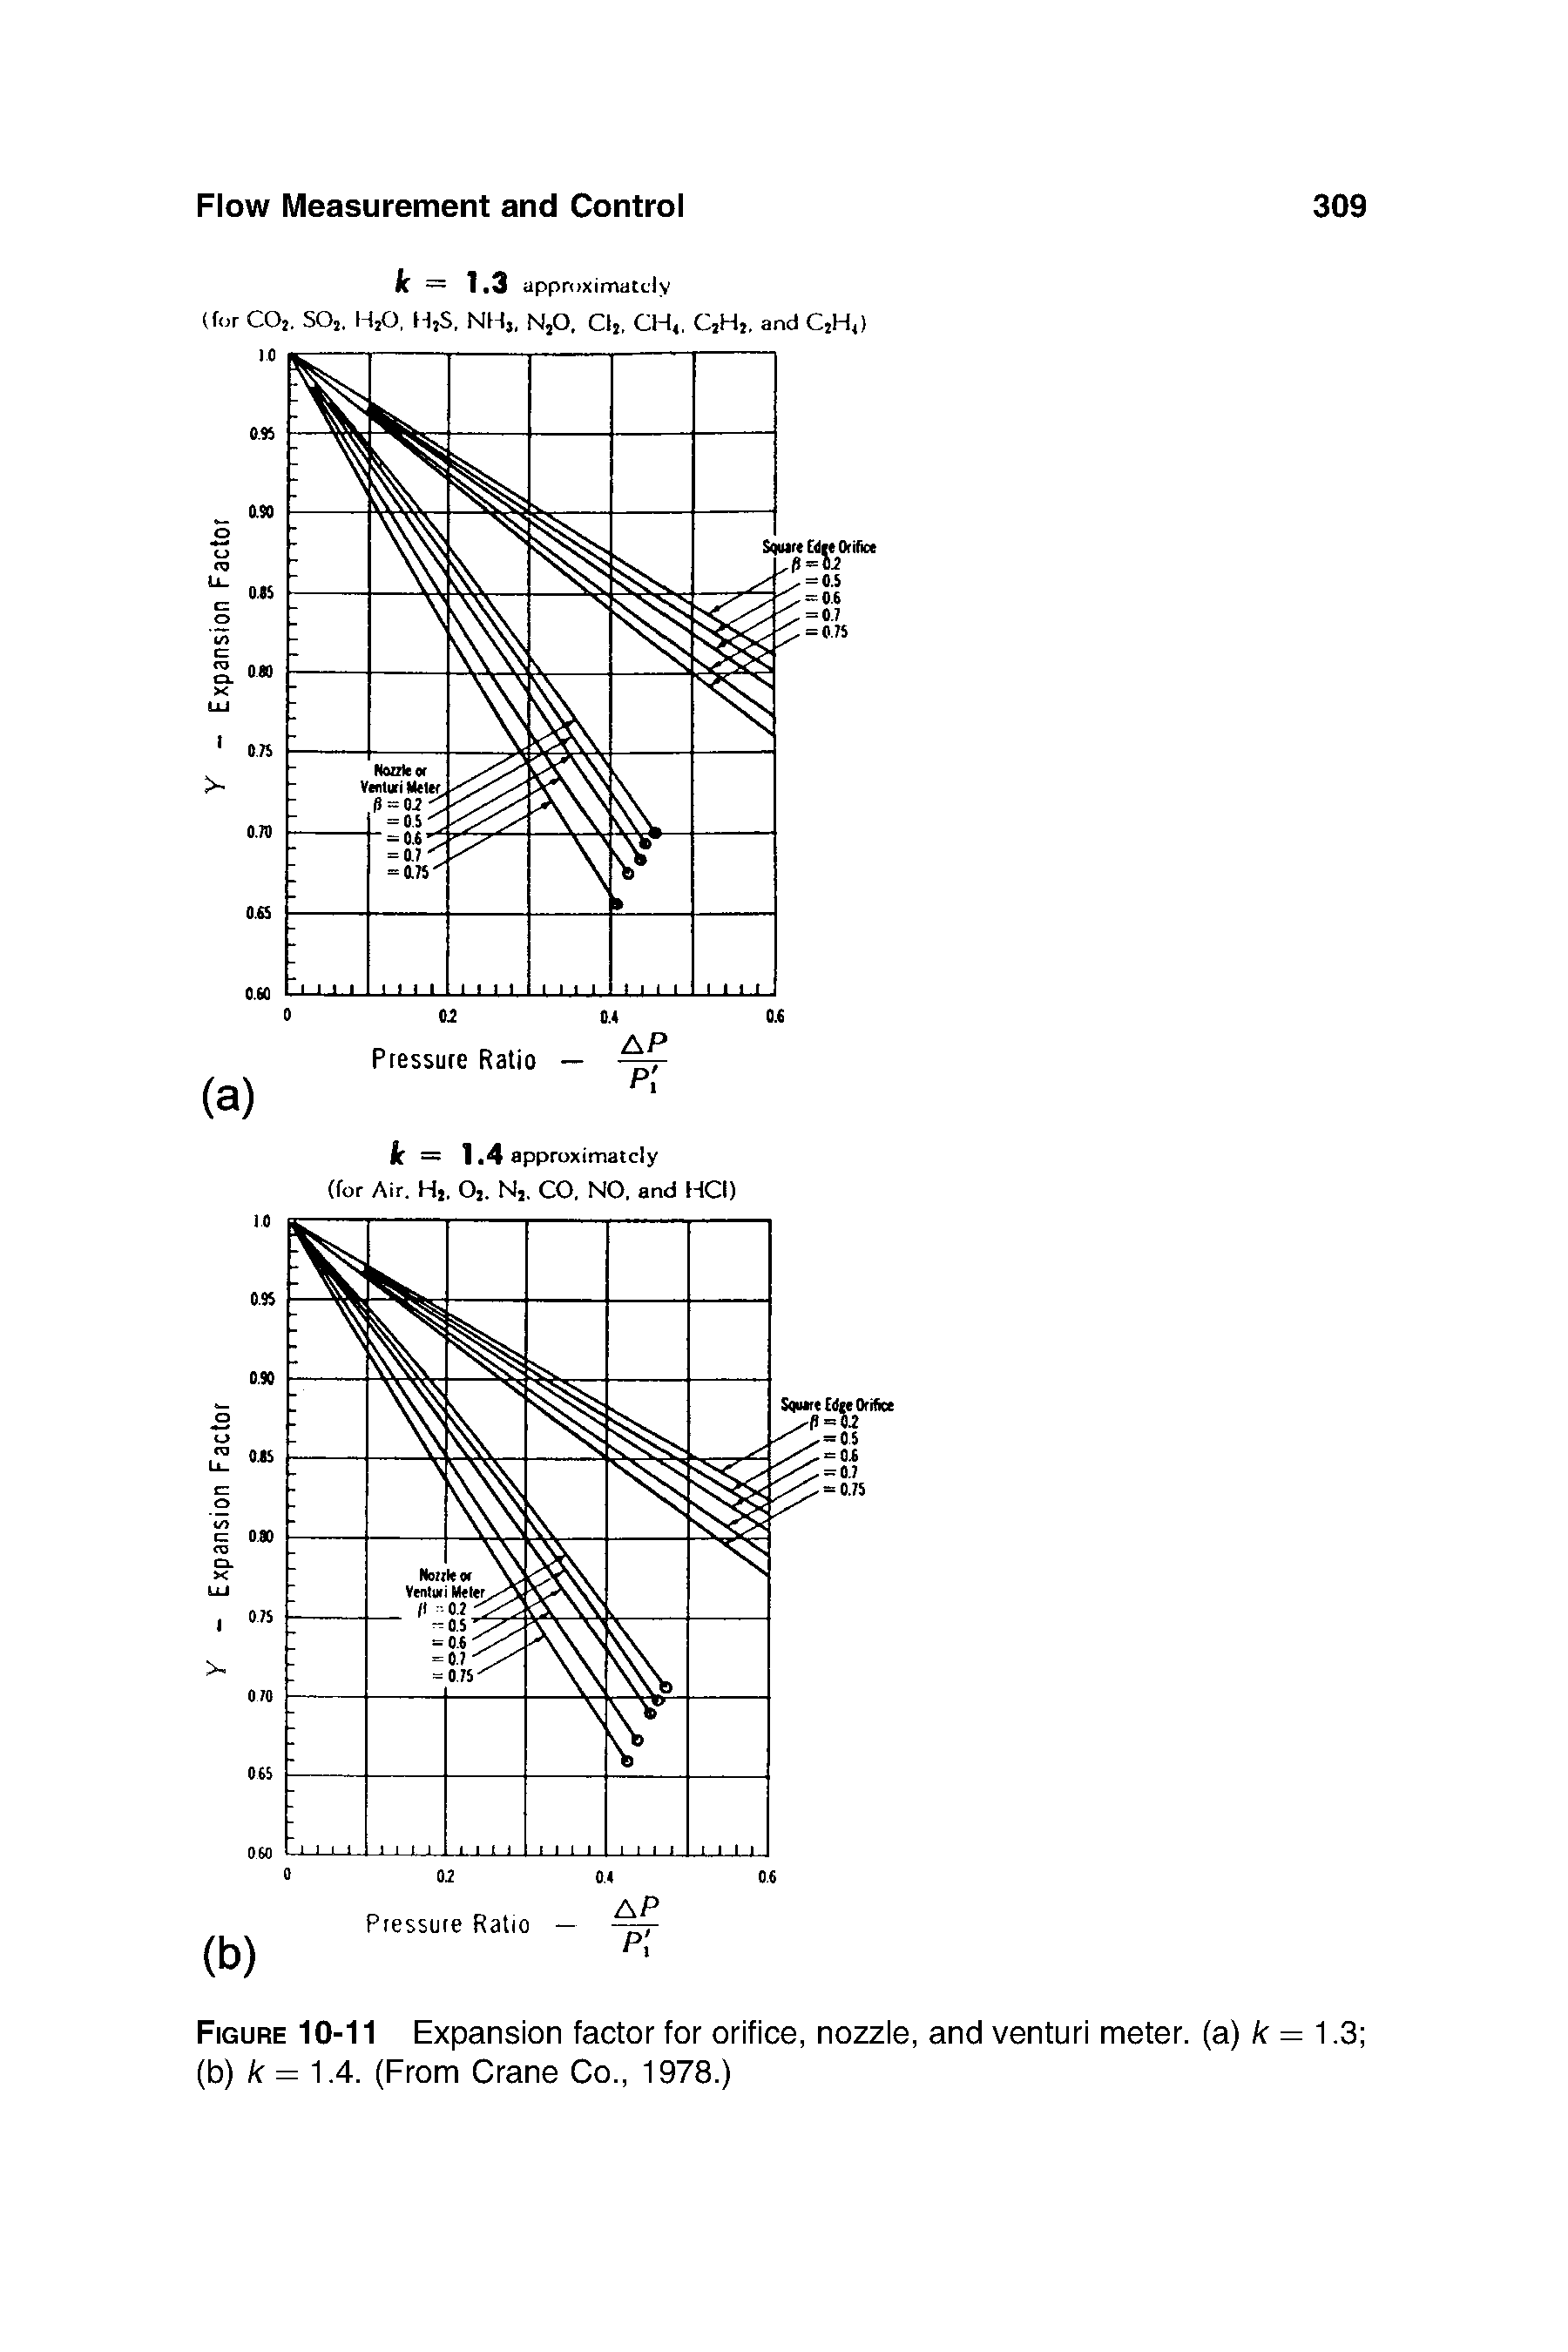 Figure 10-11 Expansion factor for orifice, nozzle, and venturi meter, (a) k = 1.3 (b) k = 1.4. (From Crane Co., 1978.)...